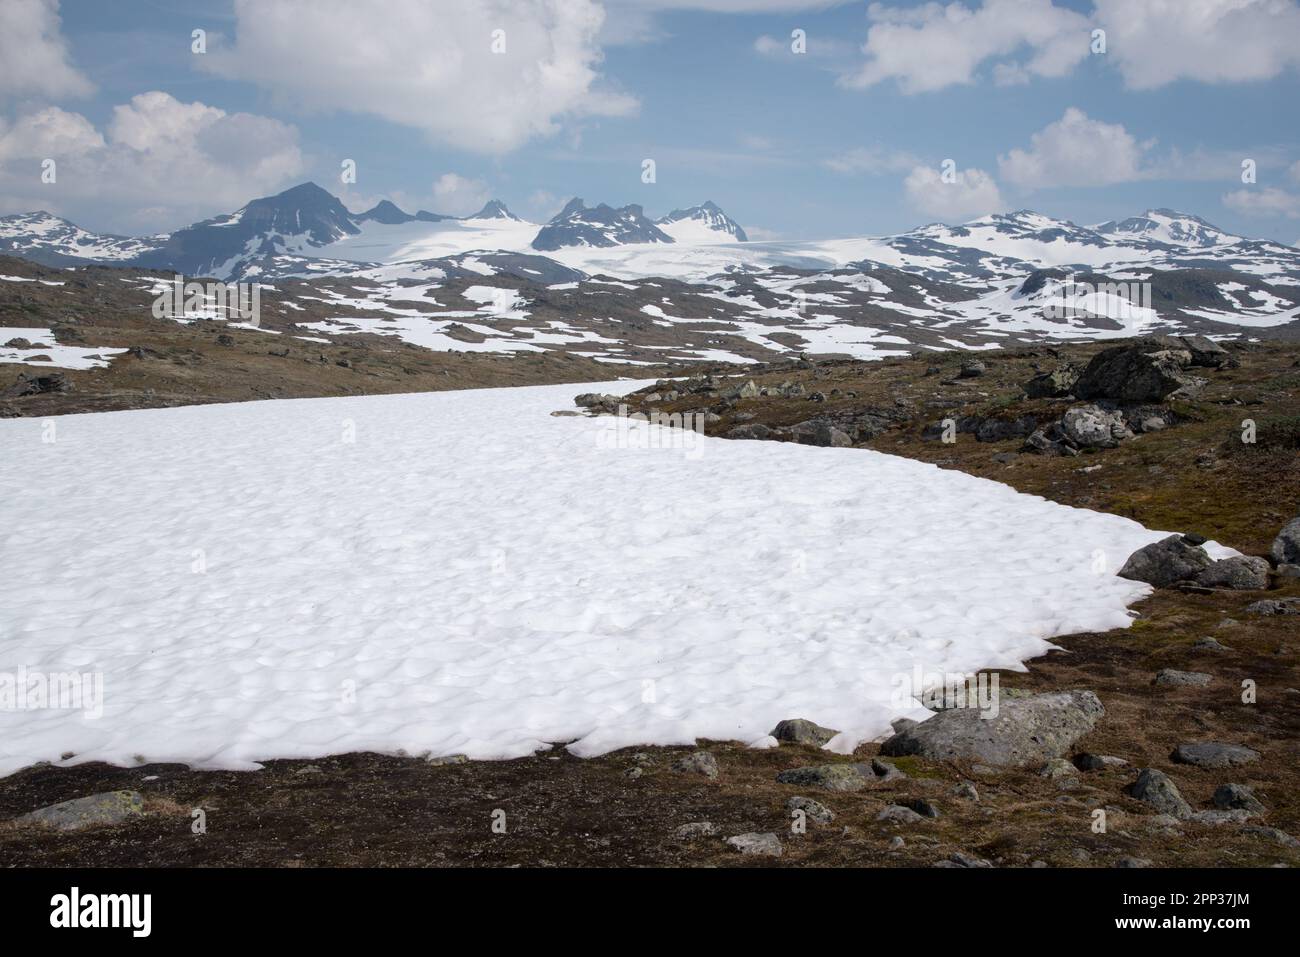 fjell at Fantesteinen in Jotunheimen with snowfields in central Norway's Innlandet county at 1434 meter amsl. Stock Photo